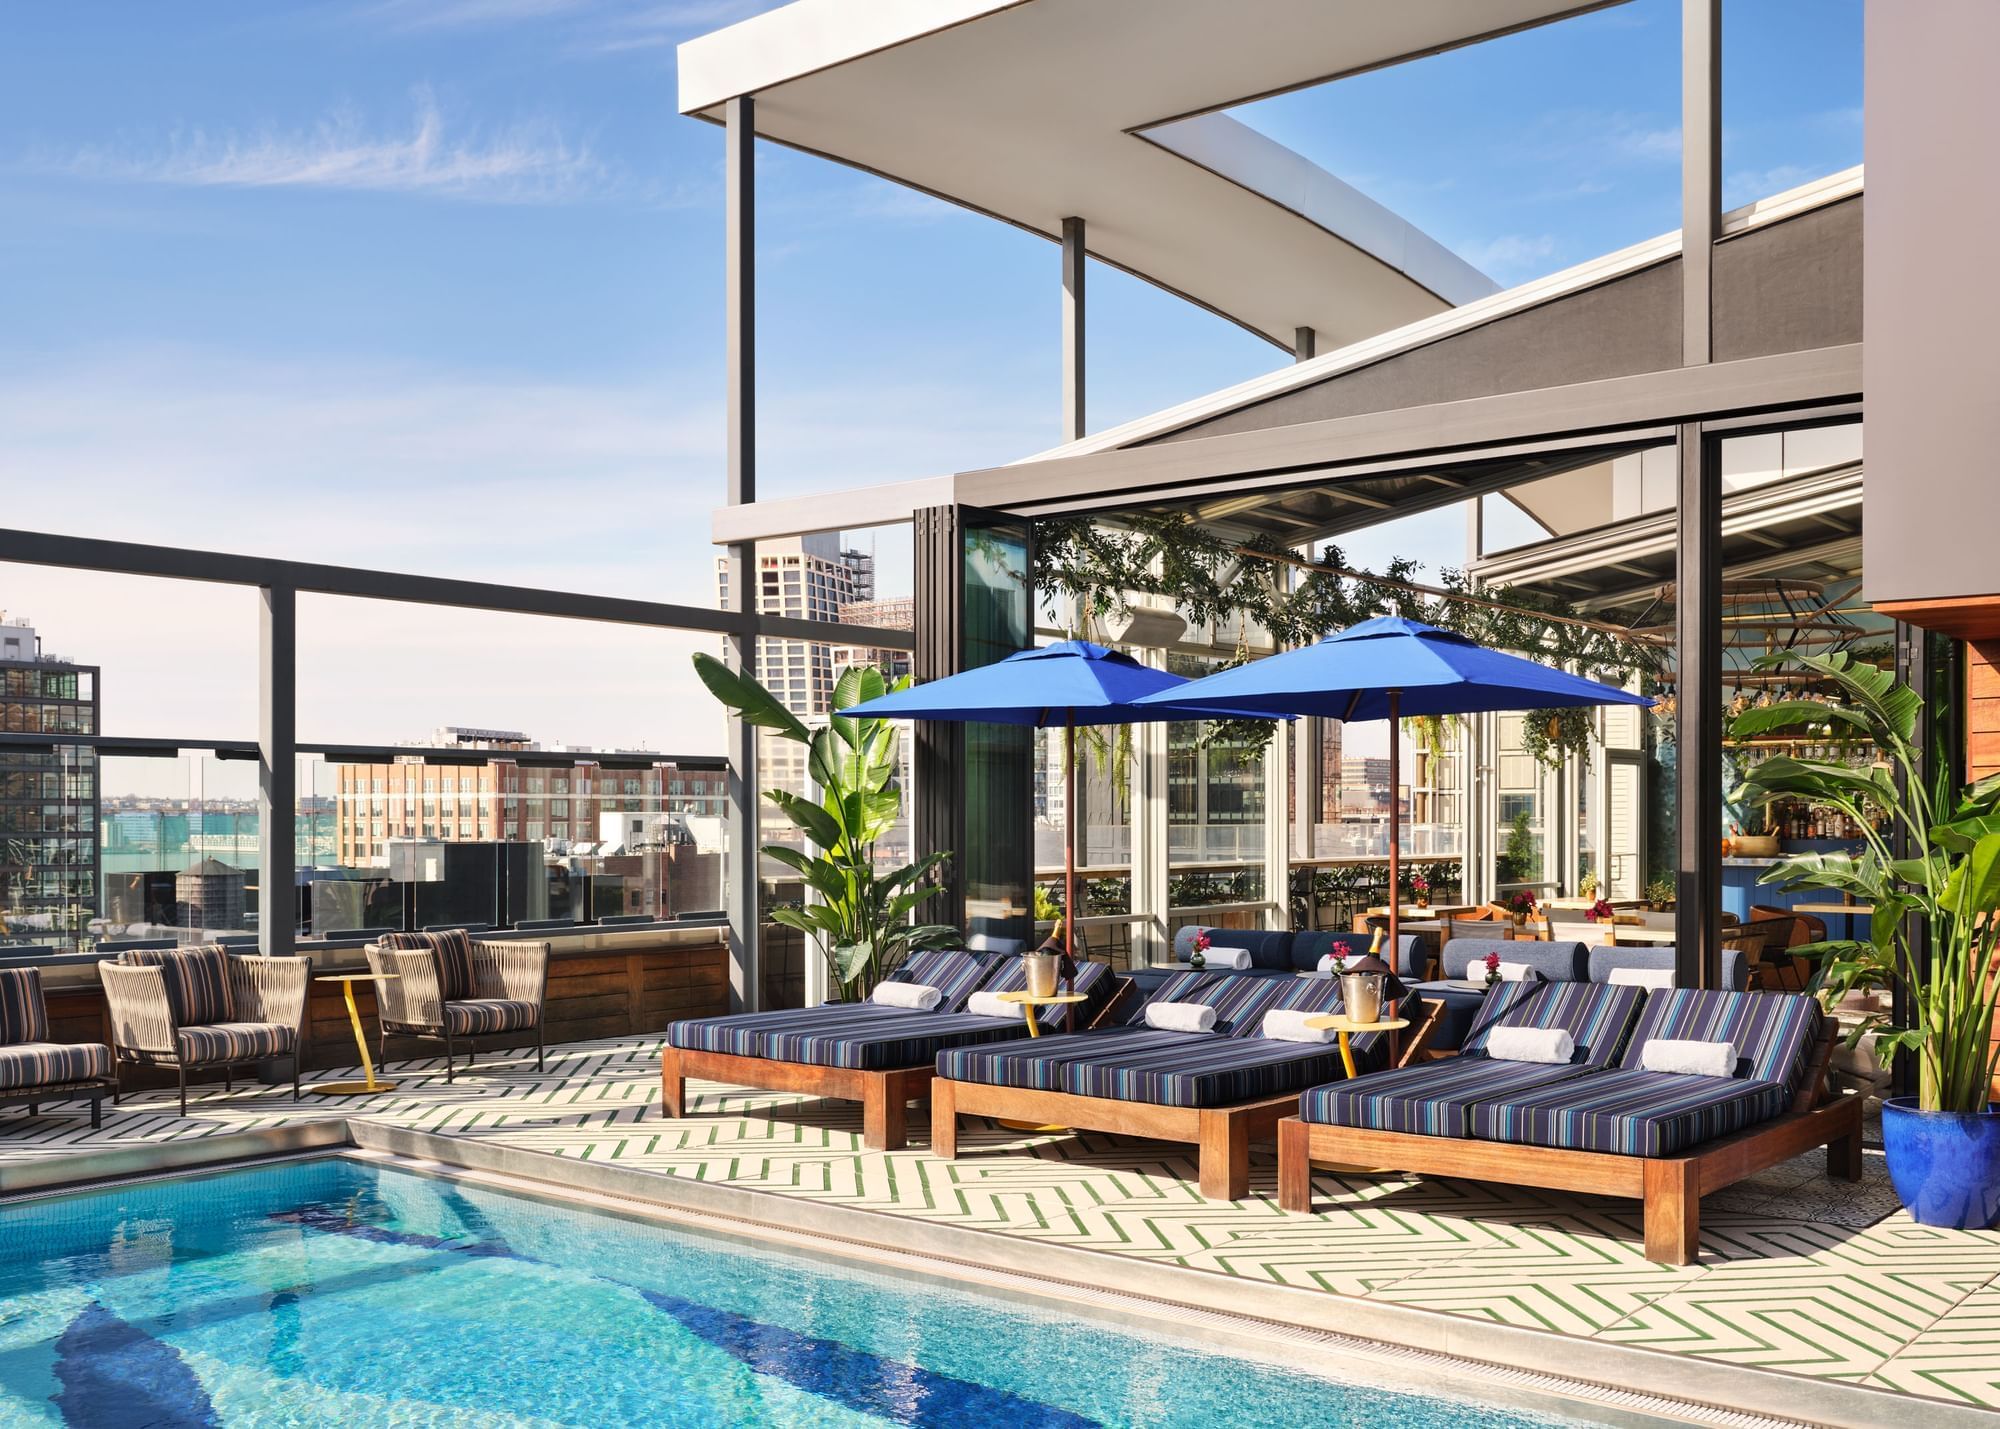 Gansevoort rooftop pool with lounge chairs and a view of the city.